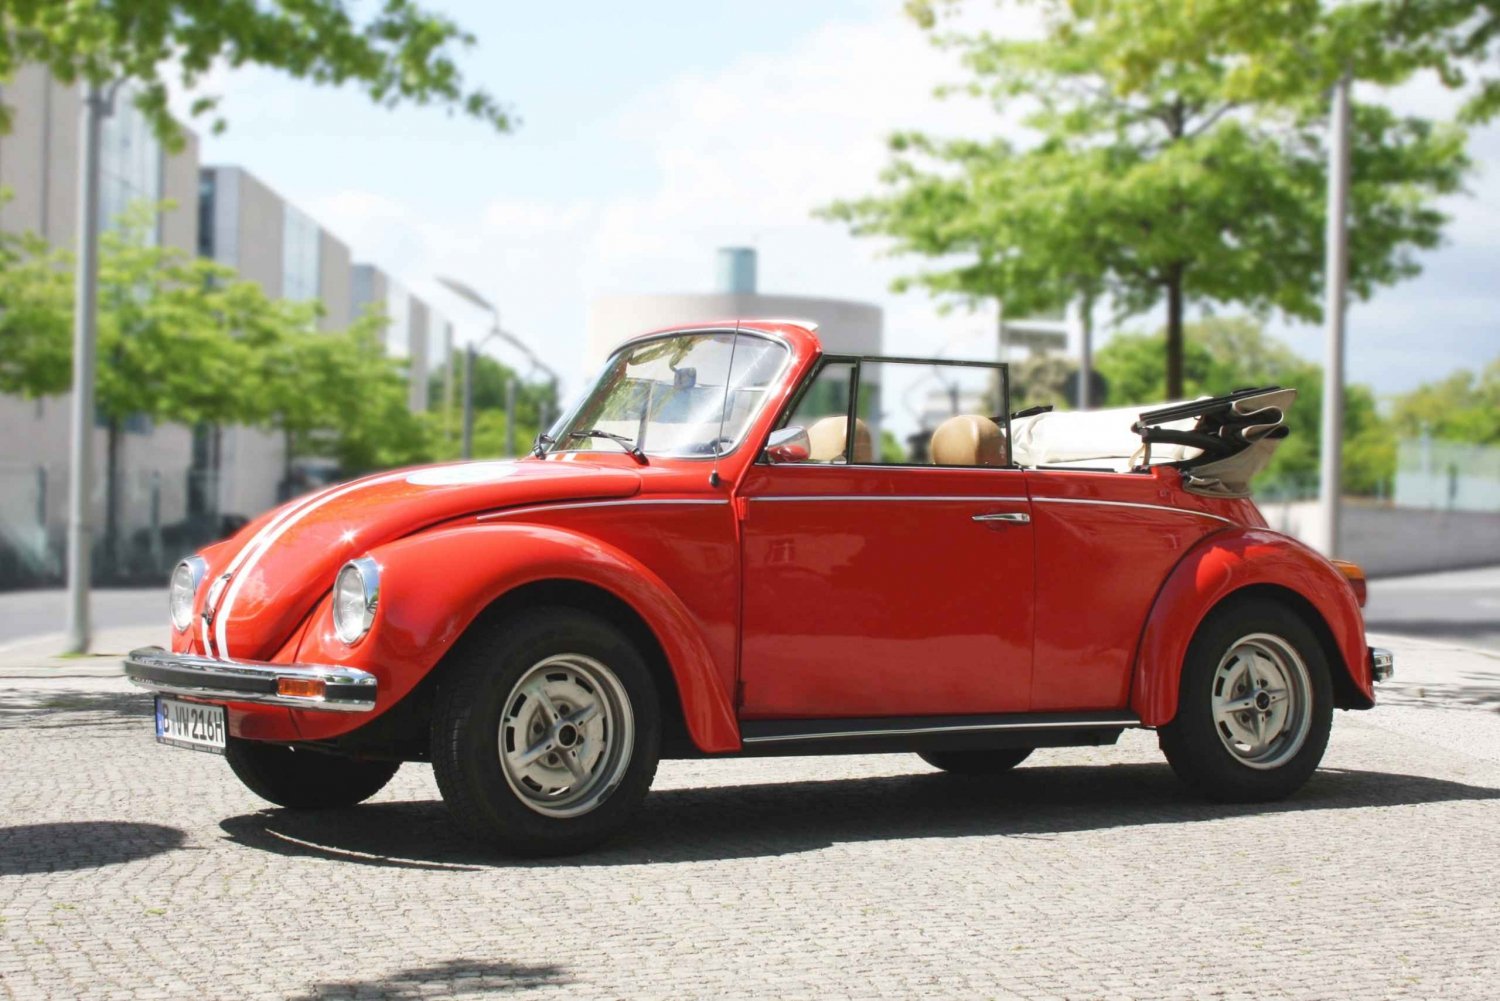 Berlino: Discovery Tour di 4 ore in VW Beetle decappottabile